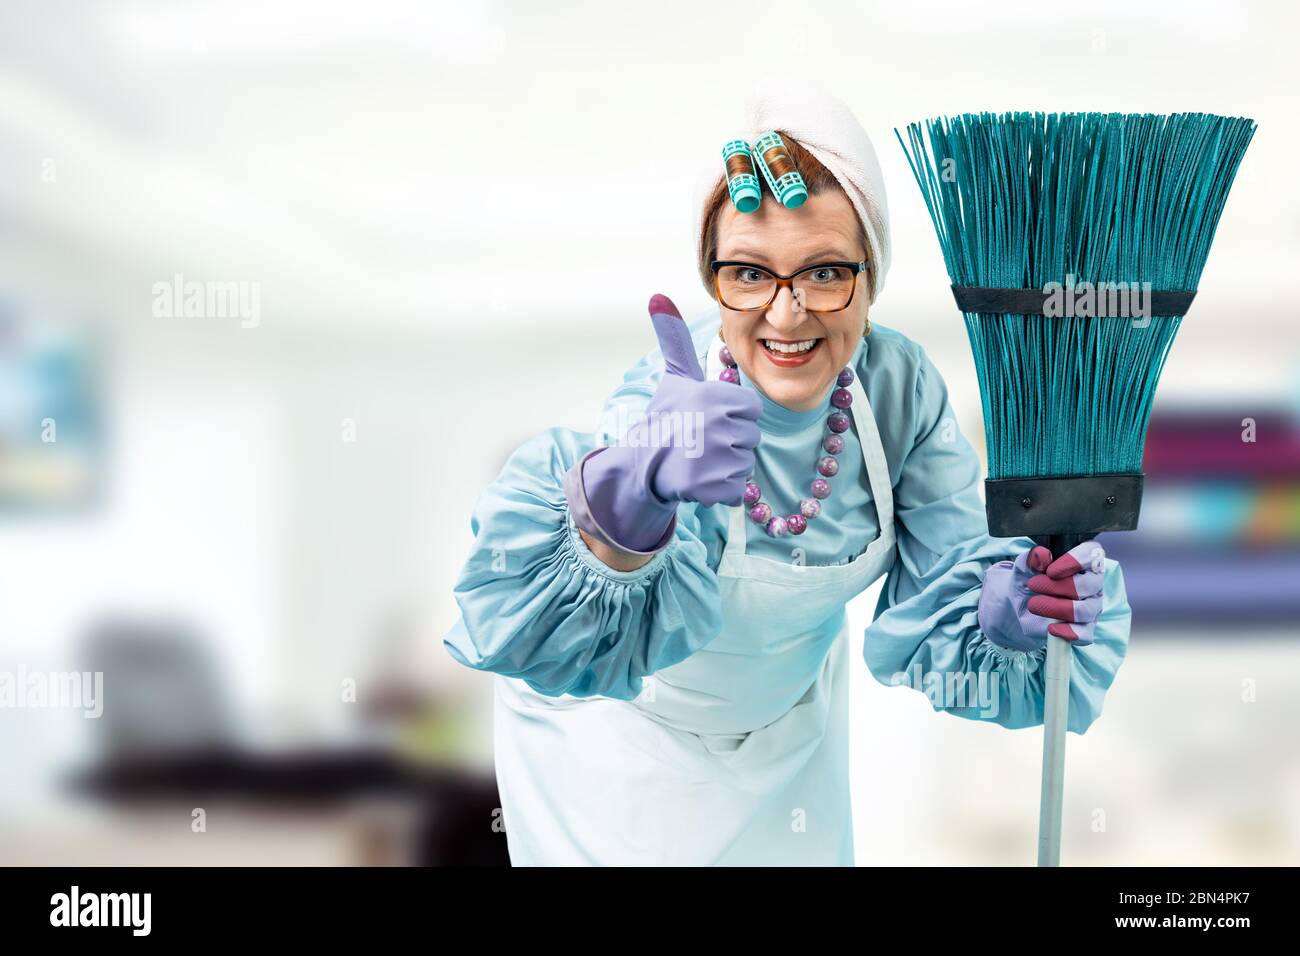 Cillit Bang Power Cleaner Stock Photo - Alamy